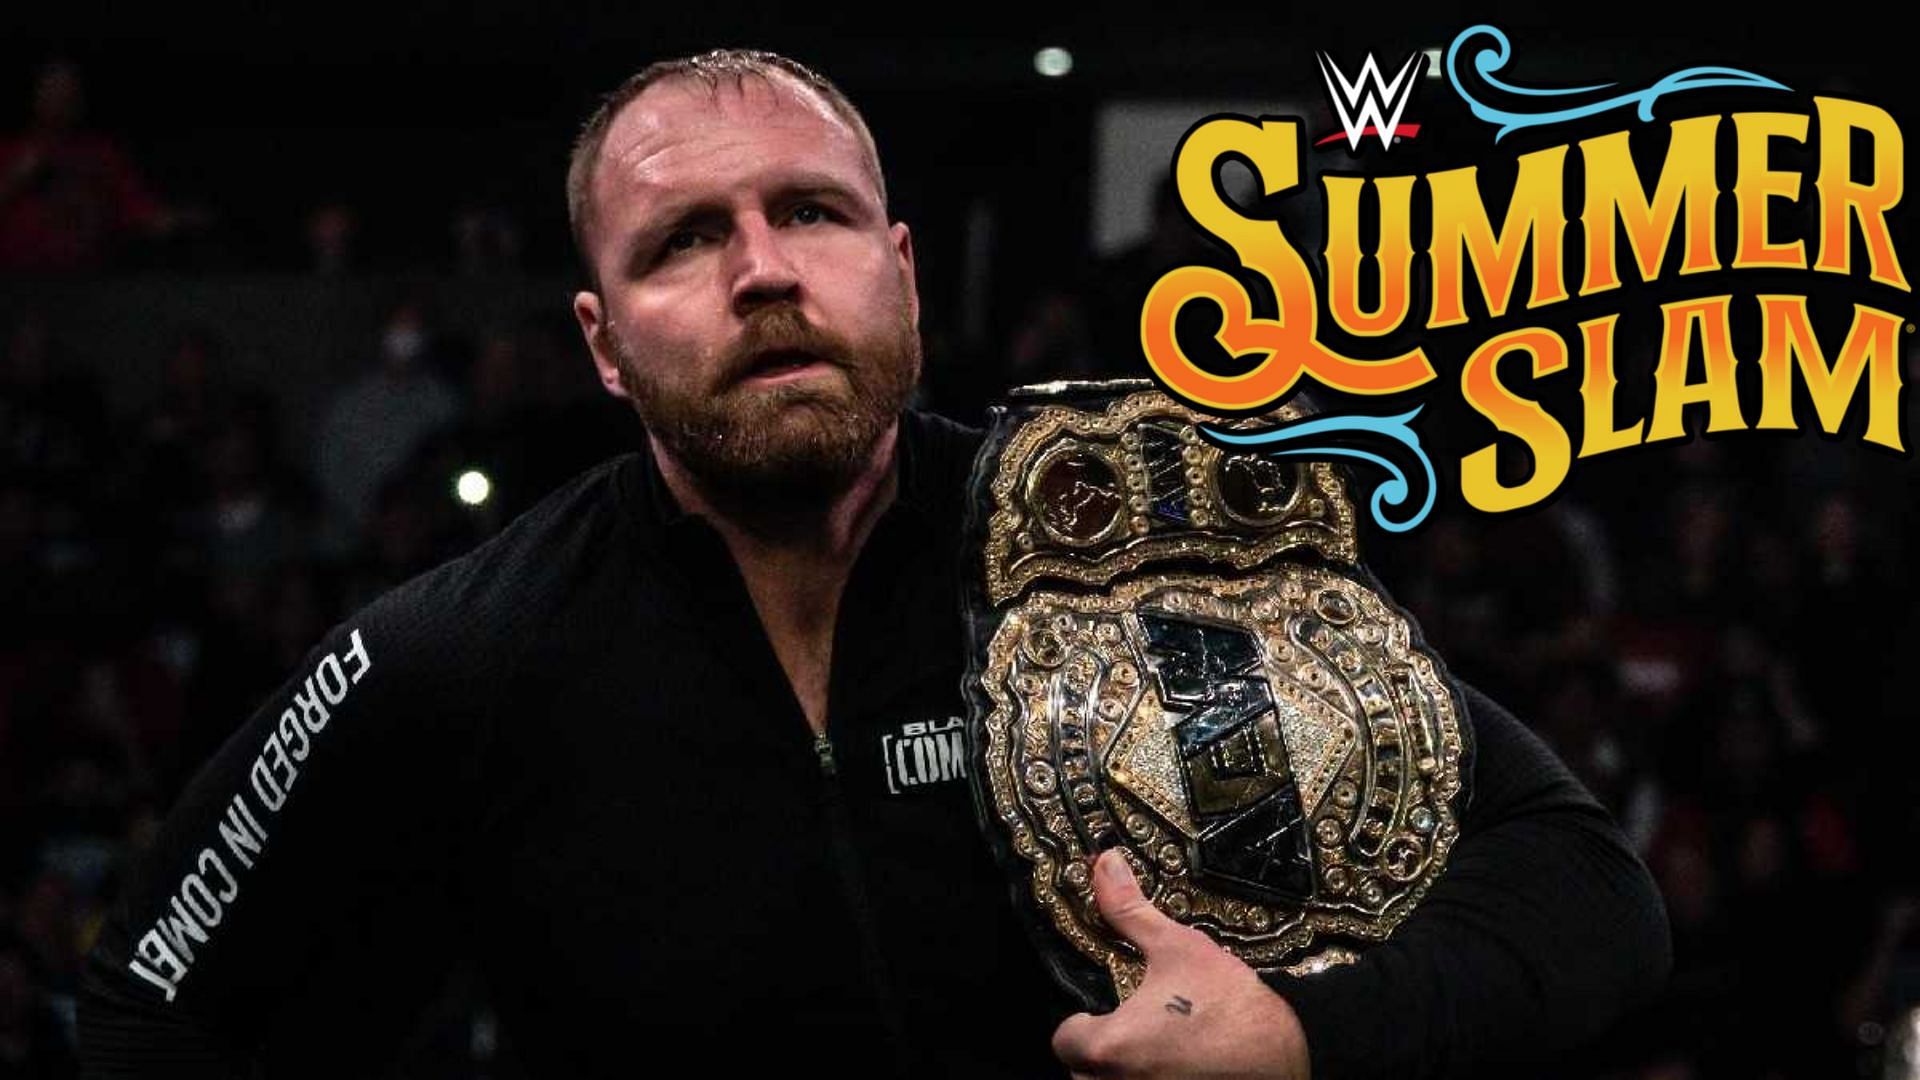 Could Jon Moxley have returned to WWE instead of re-signing with AEW last year?